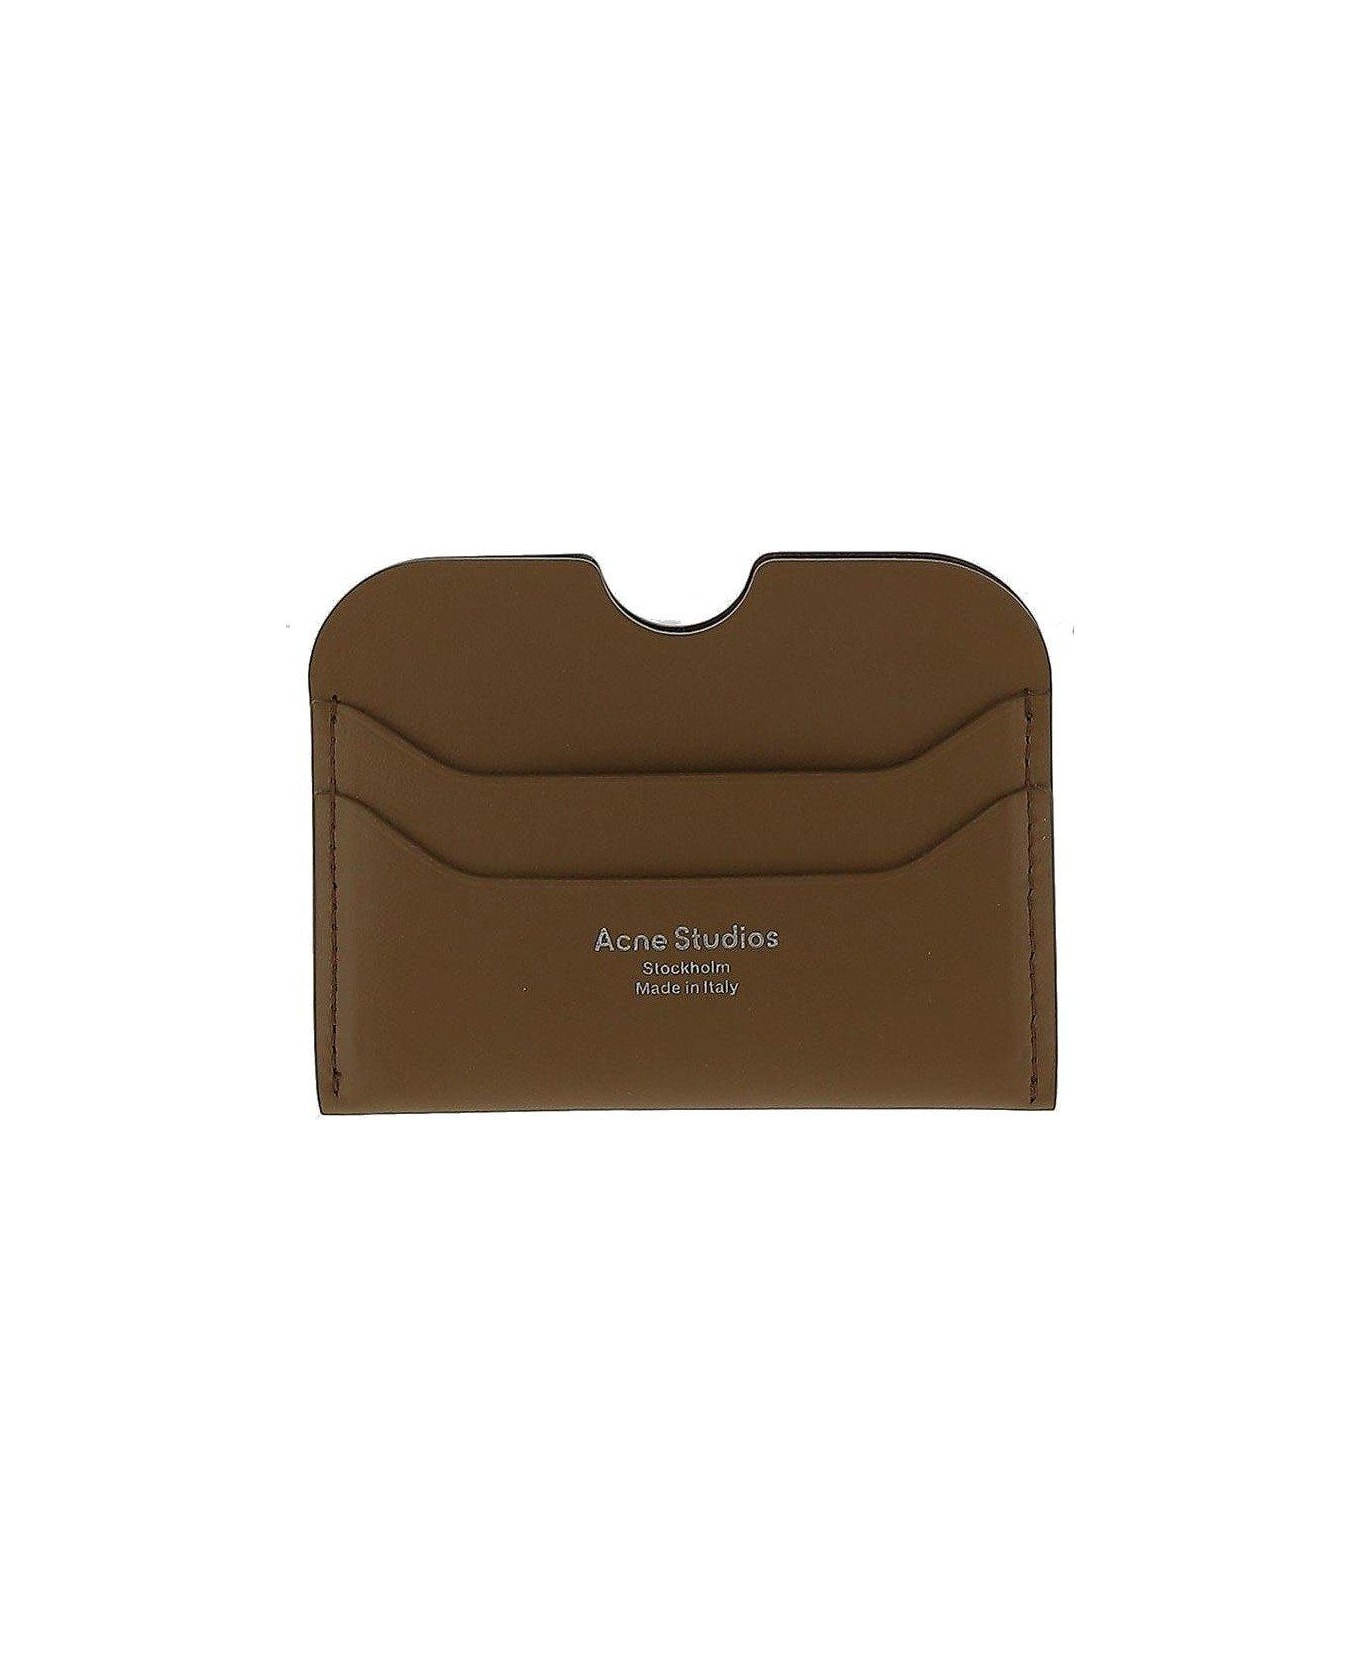 Acne Studios Logo Printed Cut-out Detailed Cardholder - CAMEL BROWN 財布